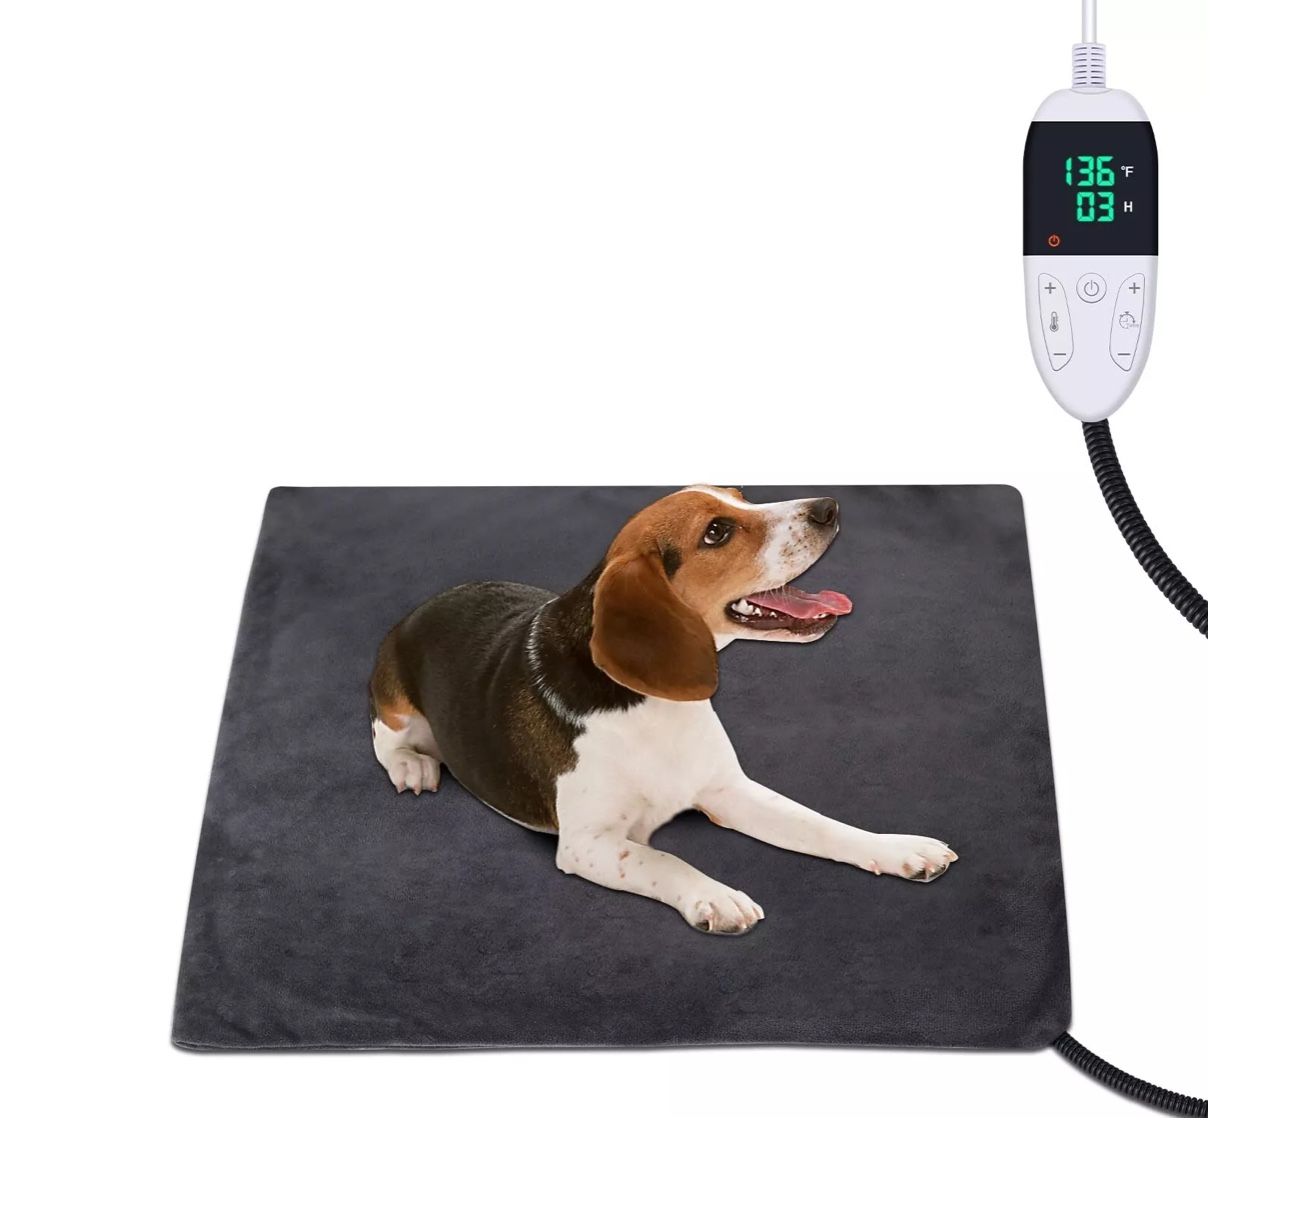 Pet Heating Pad for Dogs Cats w/ Timer Adjustable Temperature Waterproof 80-130F 18 X 18 Inches